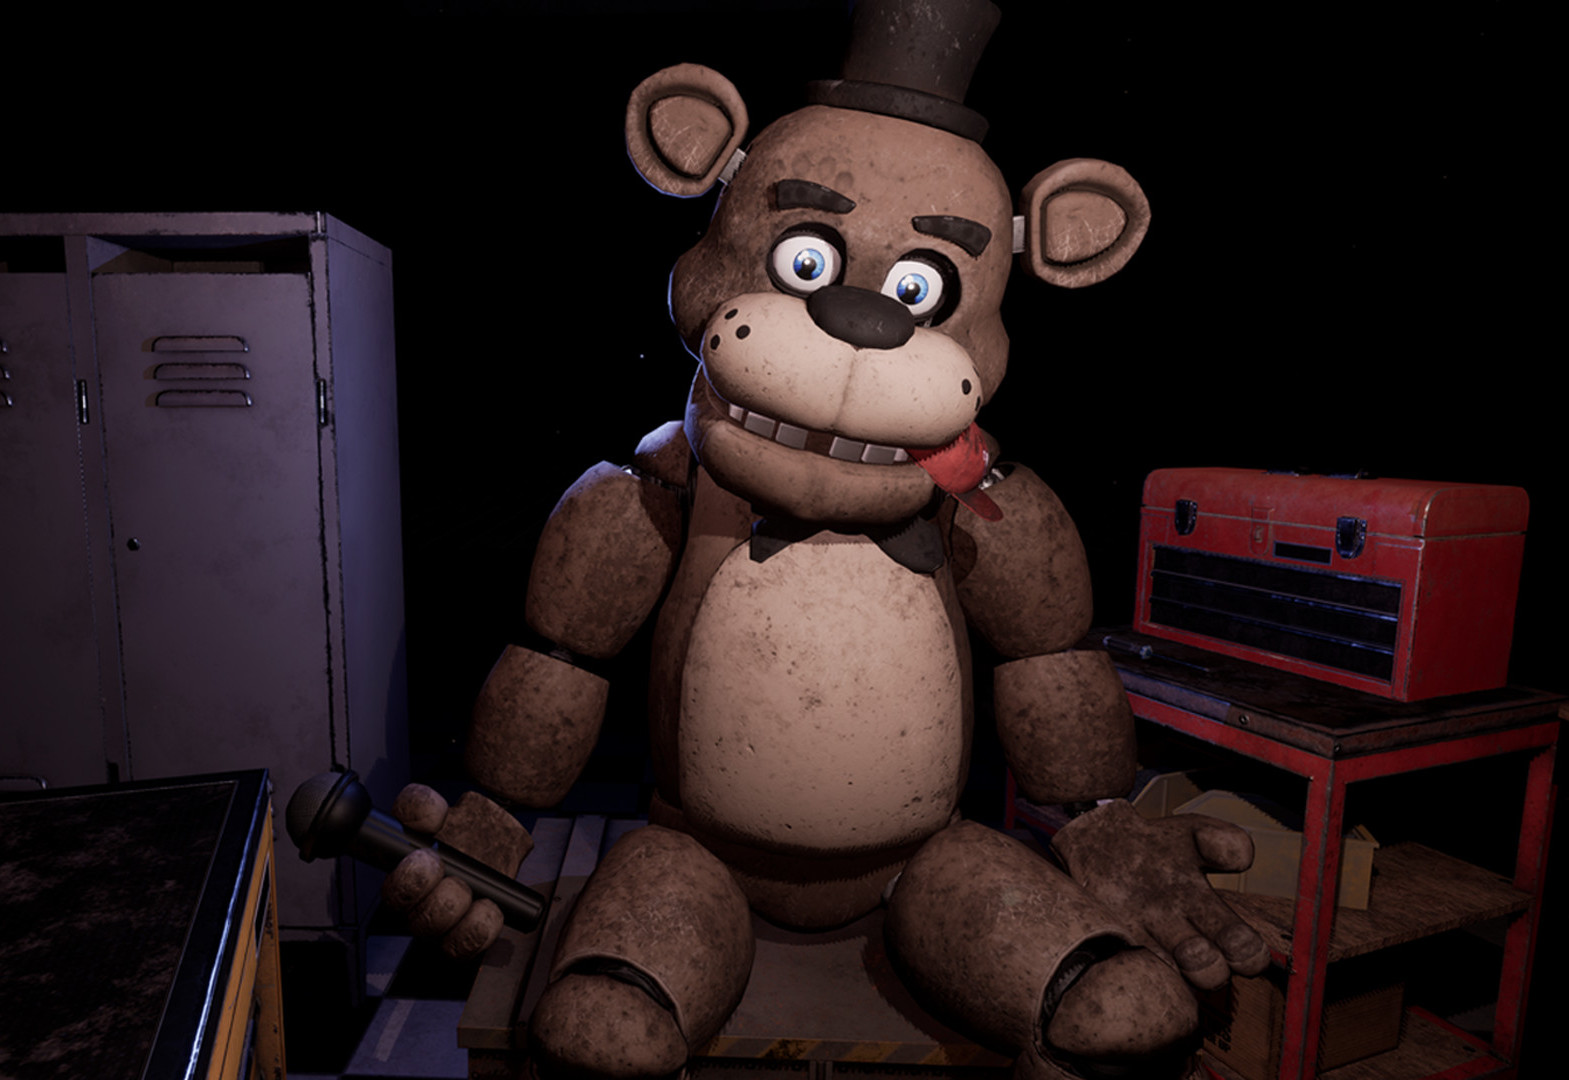 Five Nights at Freddy's VR: Help Wanted Windows, VR game - IndieDB